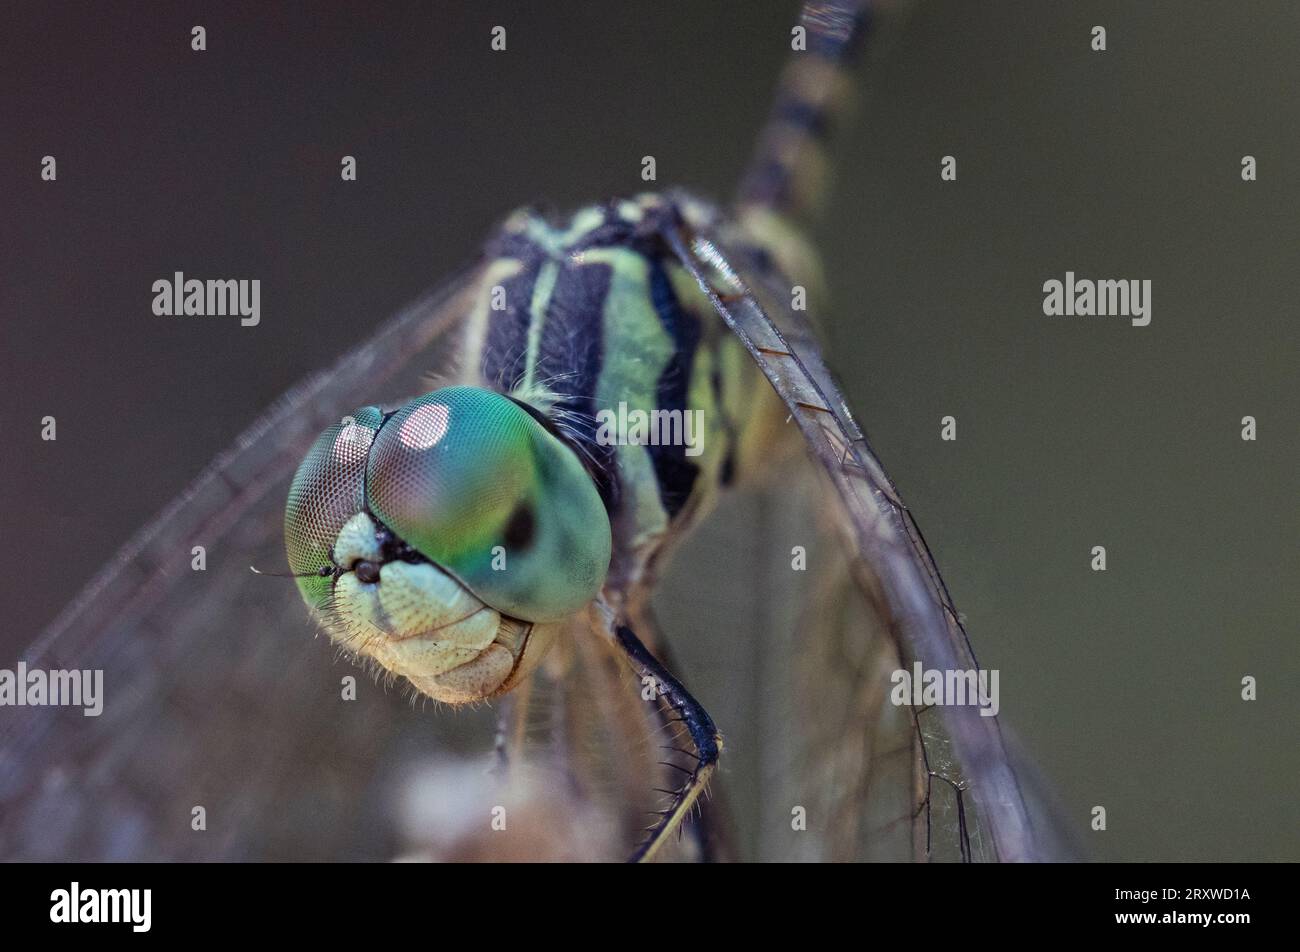 Macro close up, focus stacked shot of a yellow, green and black dragonfly Stock Photo